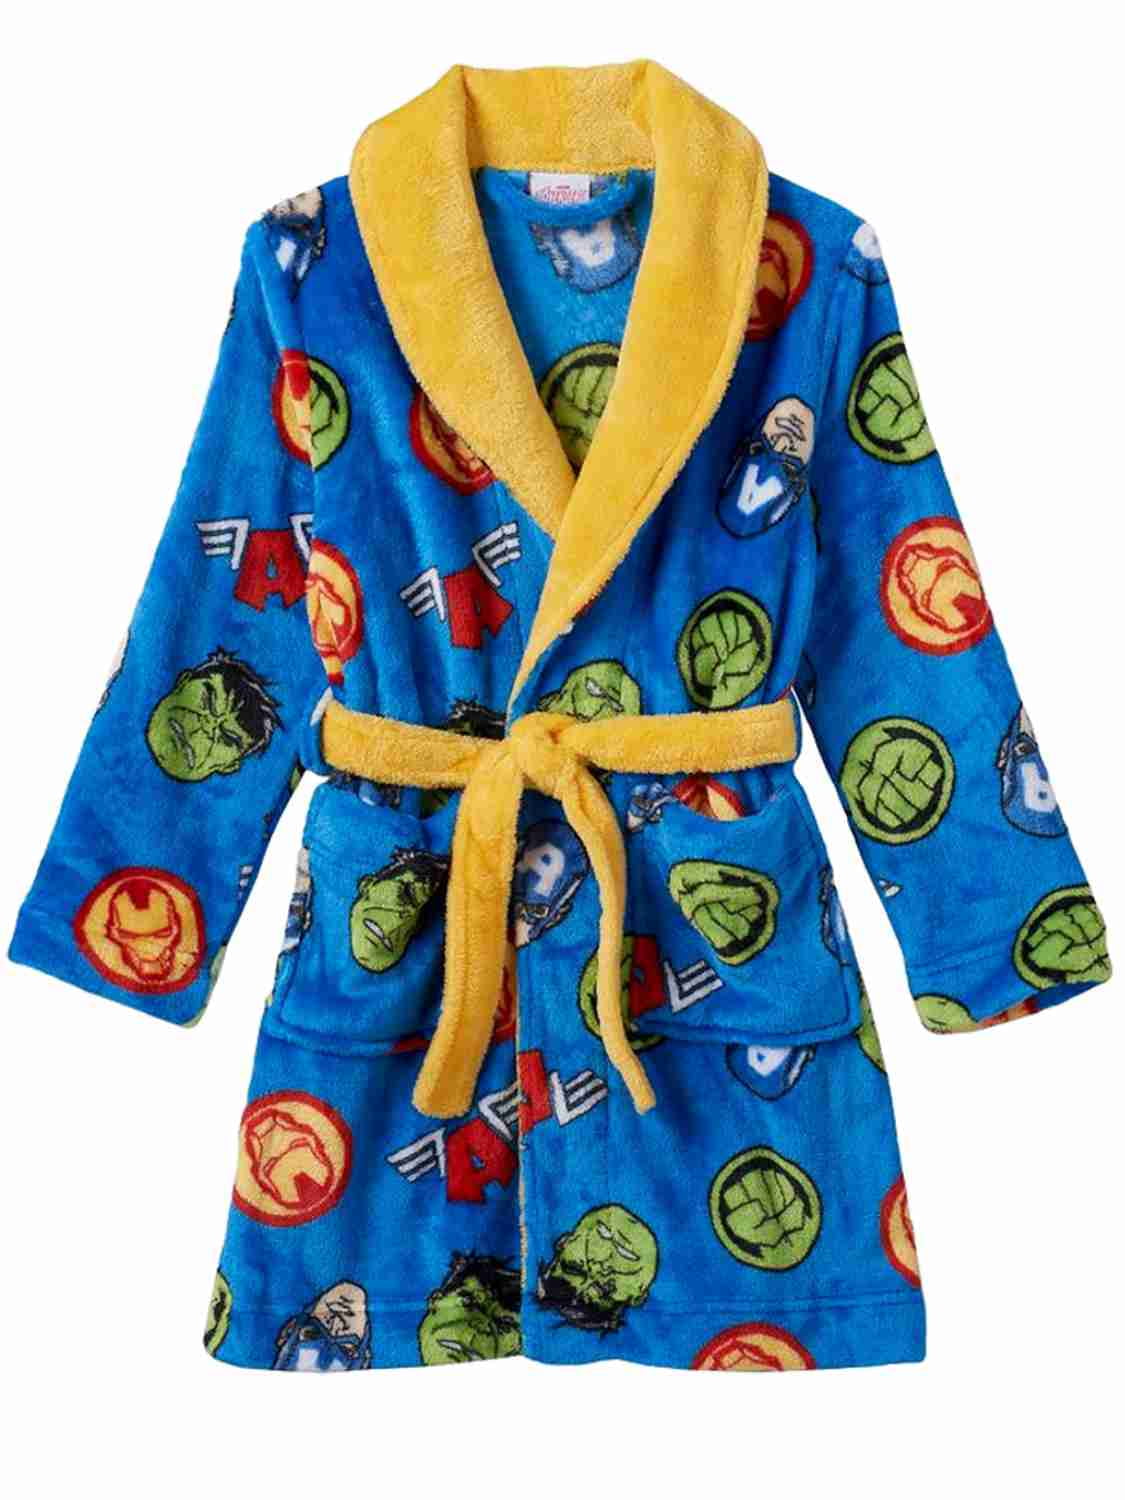 MARVEL COMICS ROBE AGE 4-8 AVENGERS OFFICIAL MERCHANDISE HOODY DRESSING GOWN 